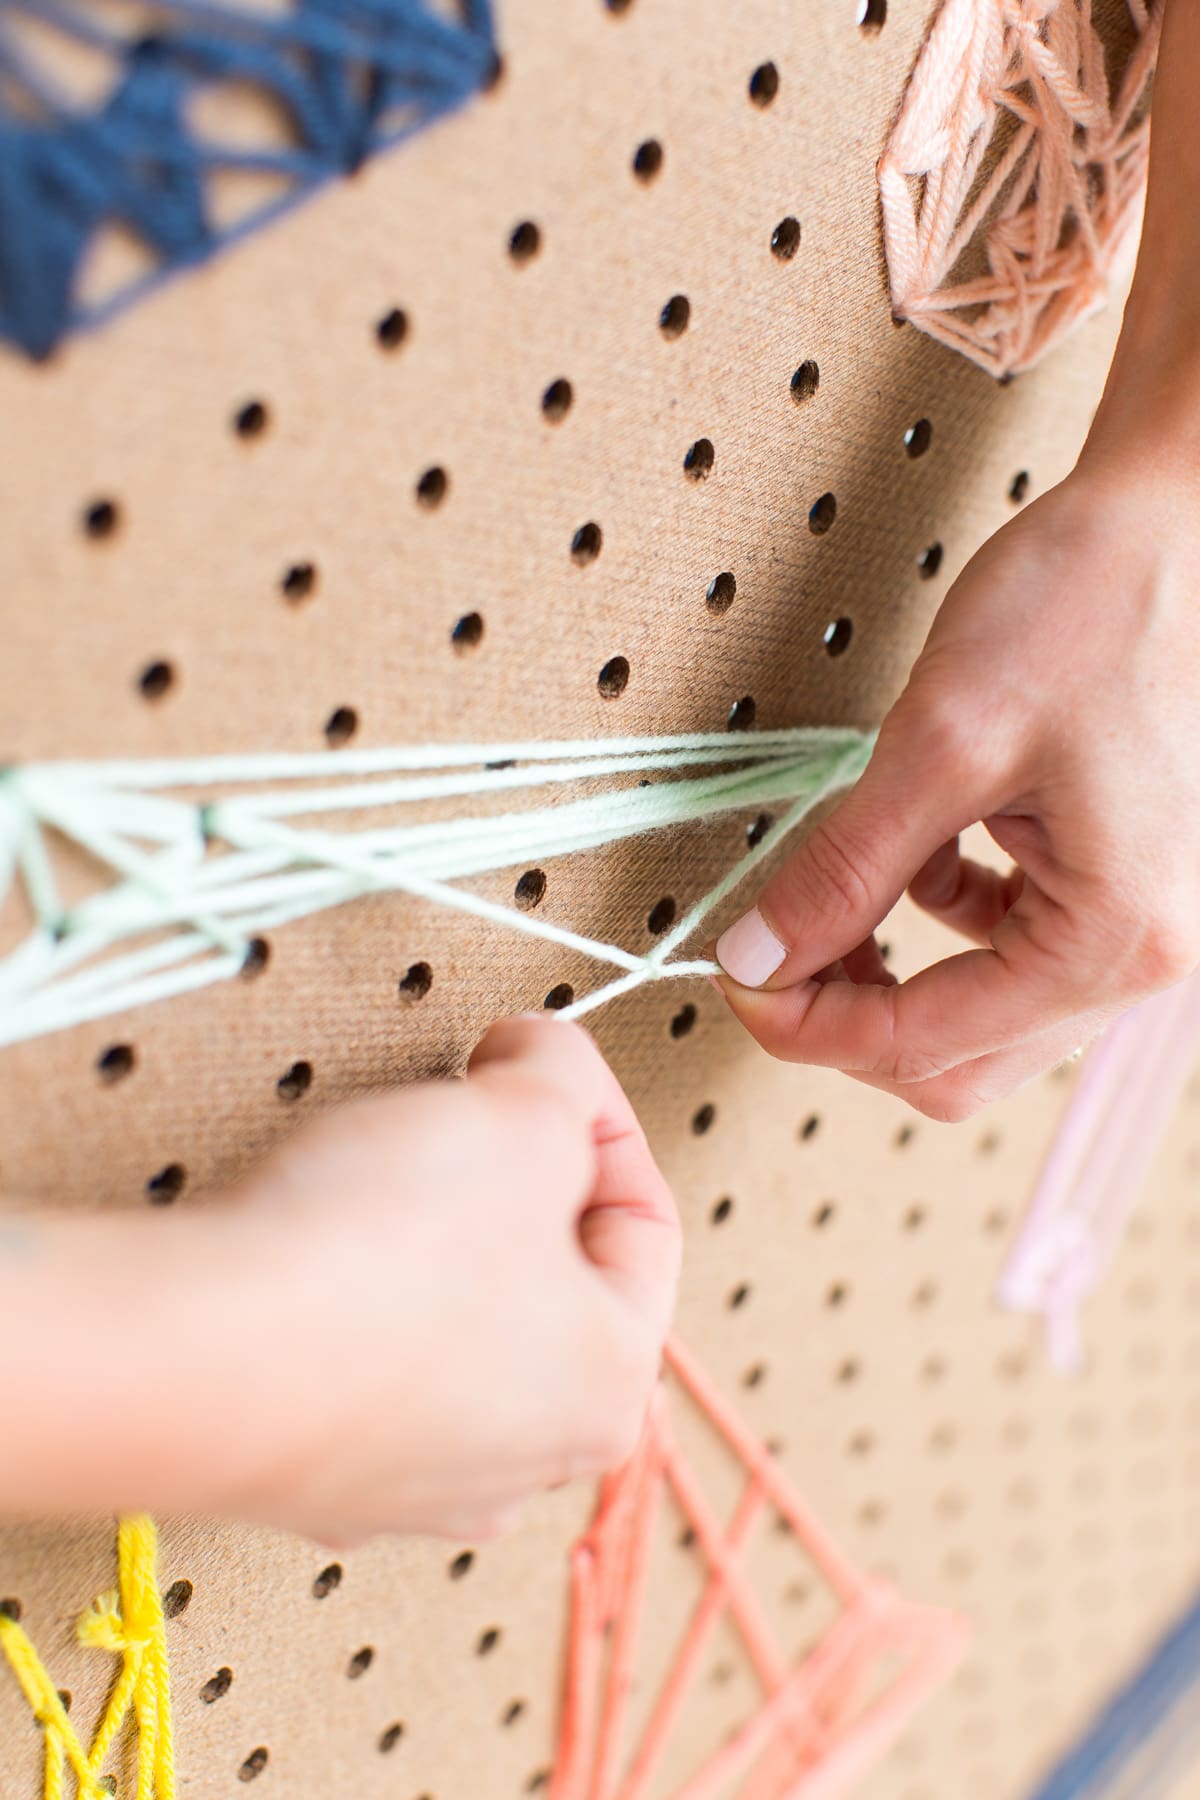 DIY pegboard wall art by top houston lifestyle blogger Ashley Rose of Sugar and Cloth